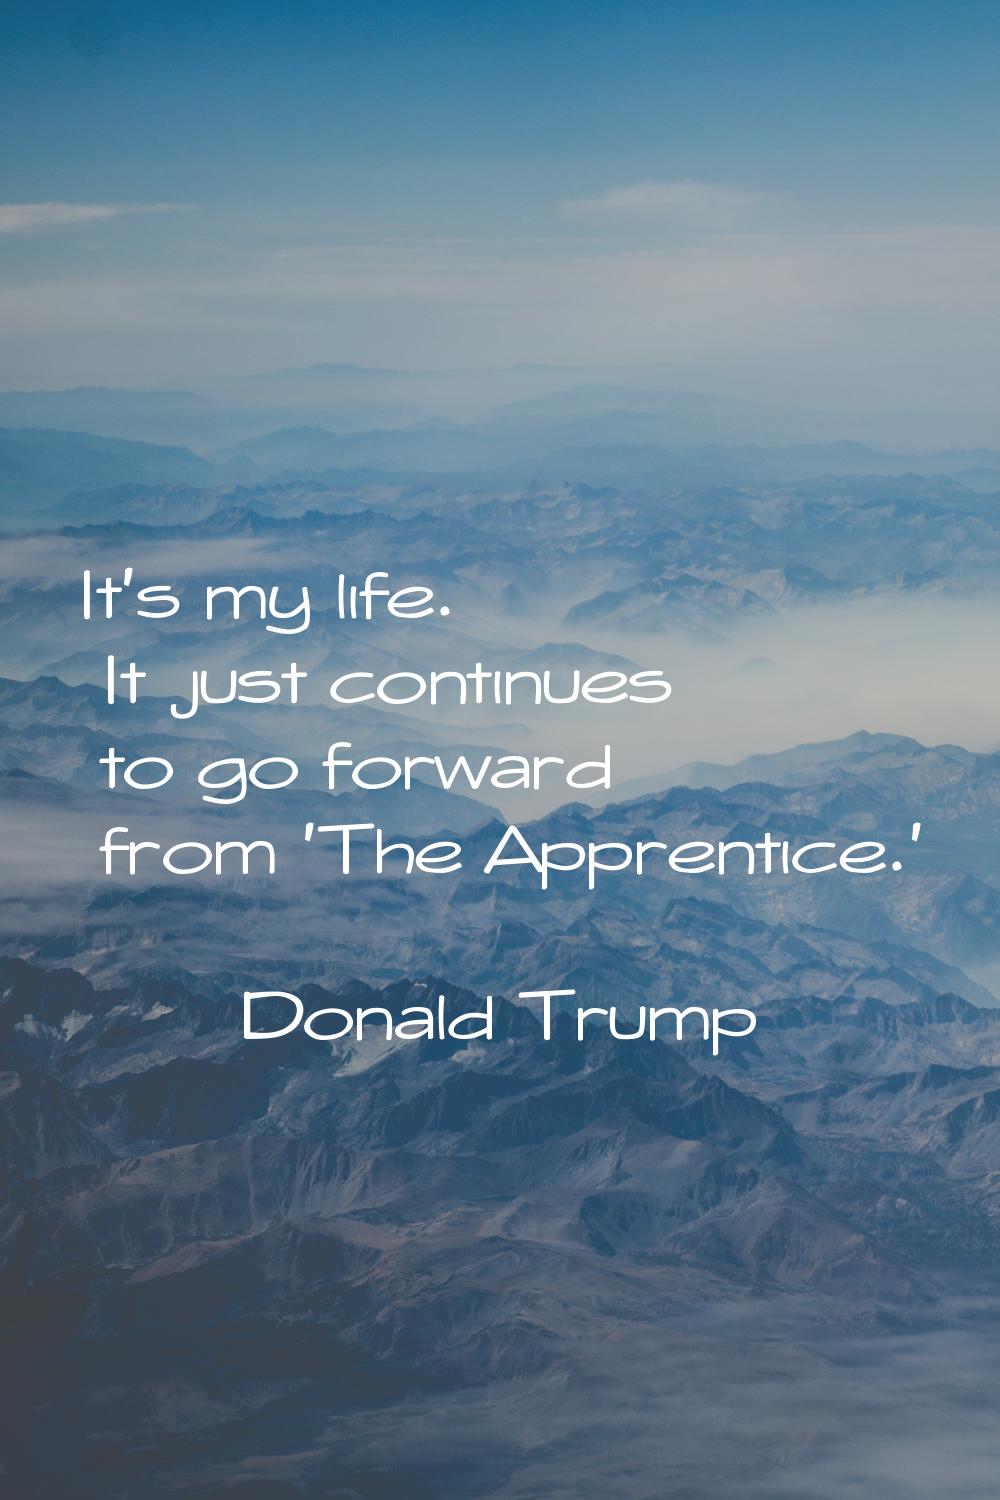 It's my life. It just continues to go forward from 'The Apprentice.'